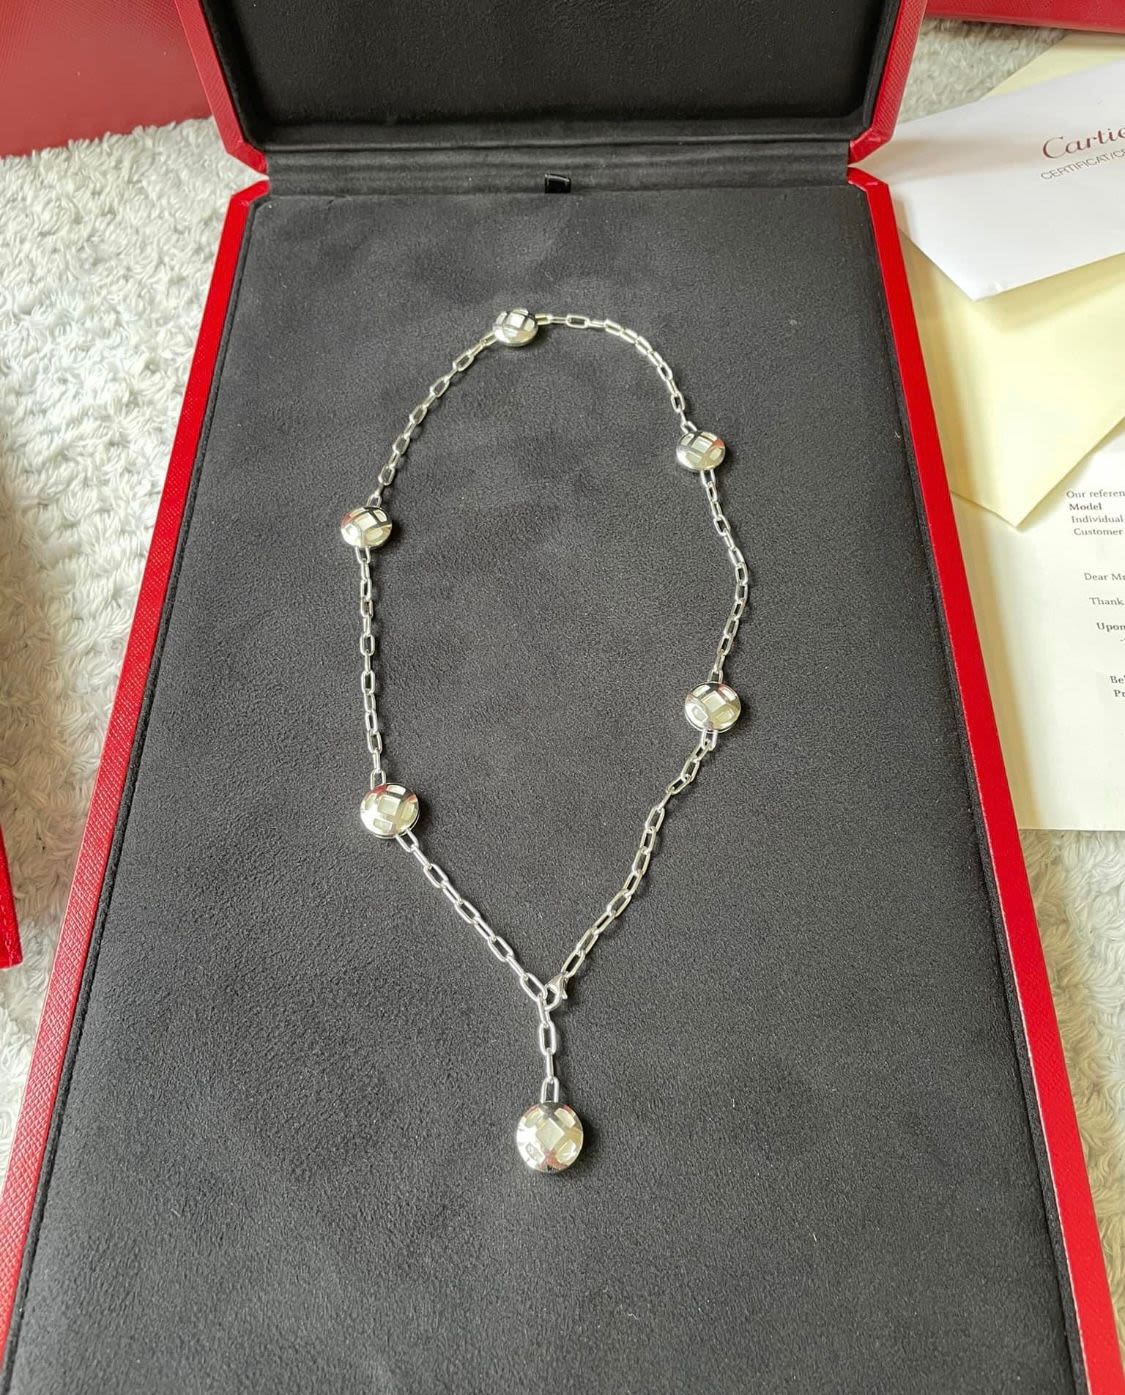 CARTIER - 18CT WHITE GOLD & MOTHER OF PEARL (PASHA DE' CARTIER) NECKLACE - Image 2 of 4